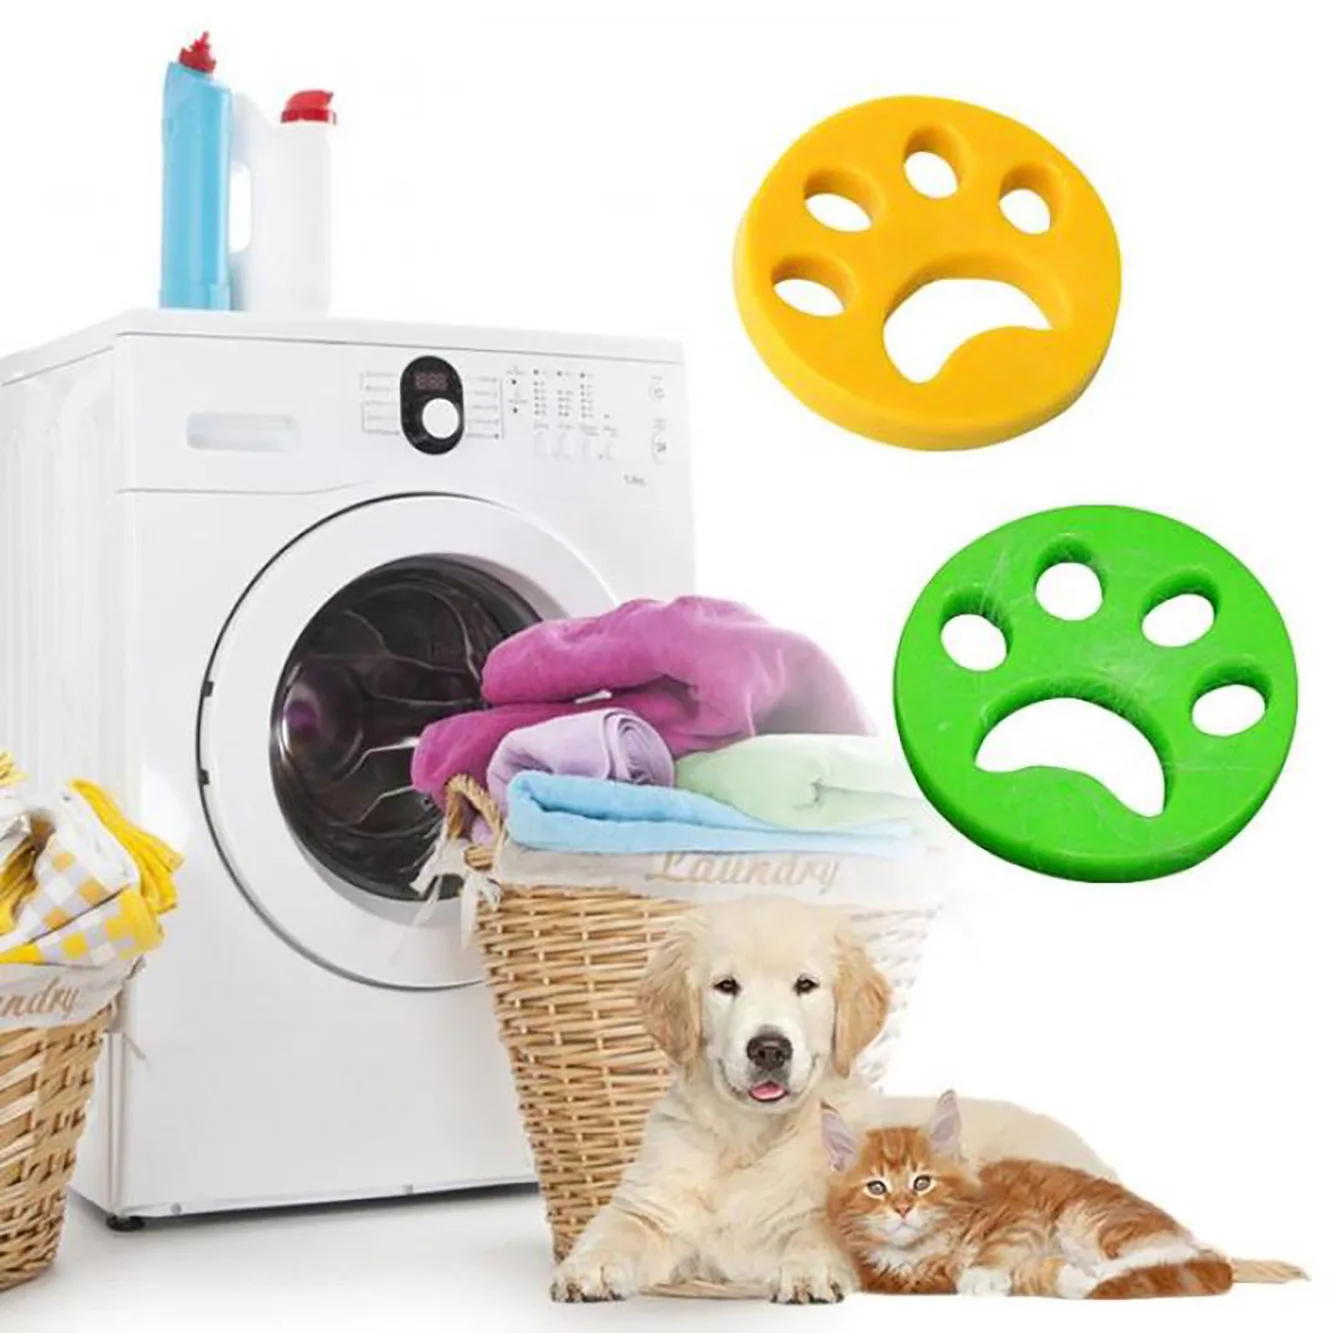 

Factory Cheap Price 2 Pack Reusable Sticky Washing Machine Hair Catcher Pet Fur Catcher Zapper Pet Hair Removerfor Laundry, Green /orange